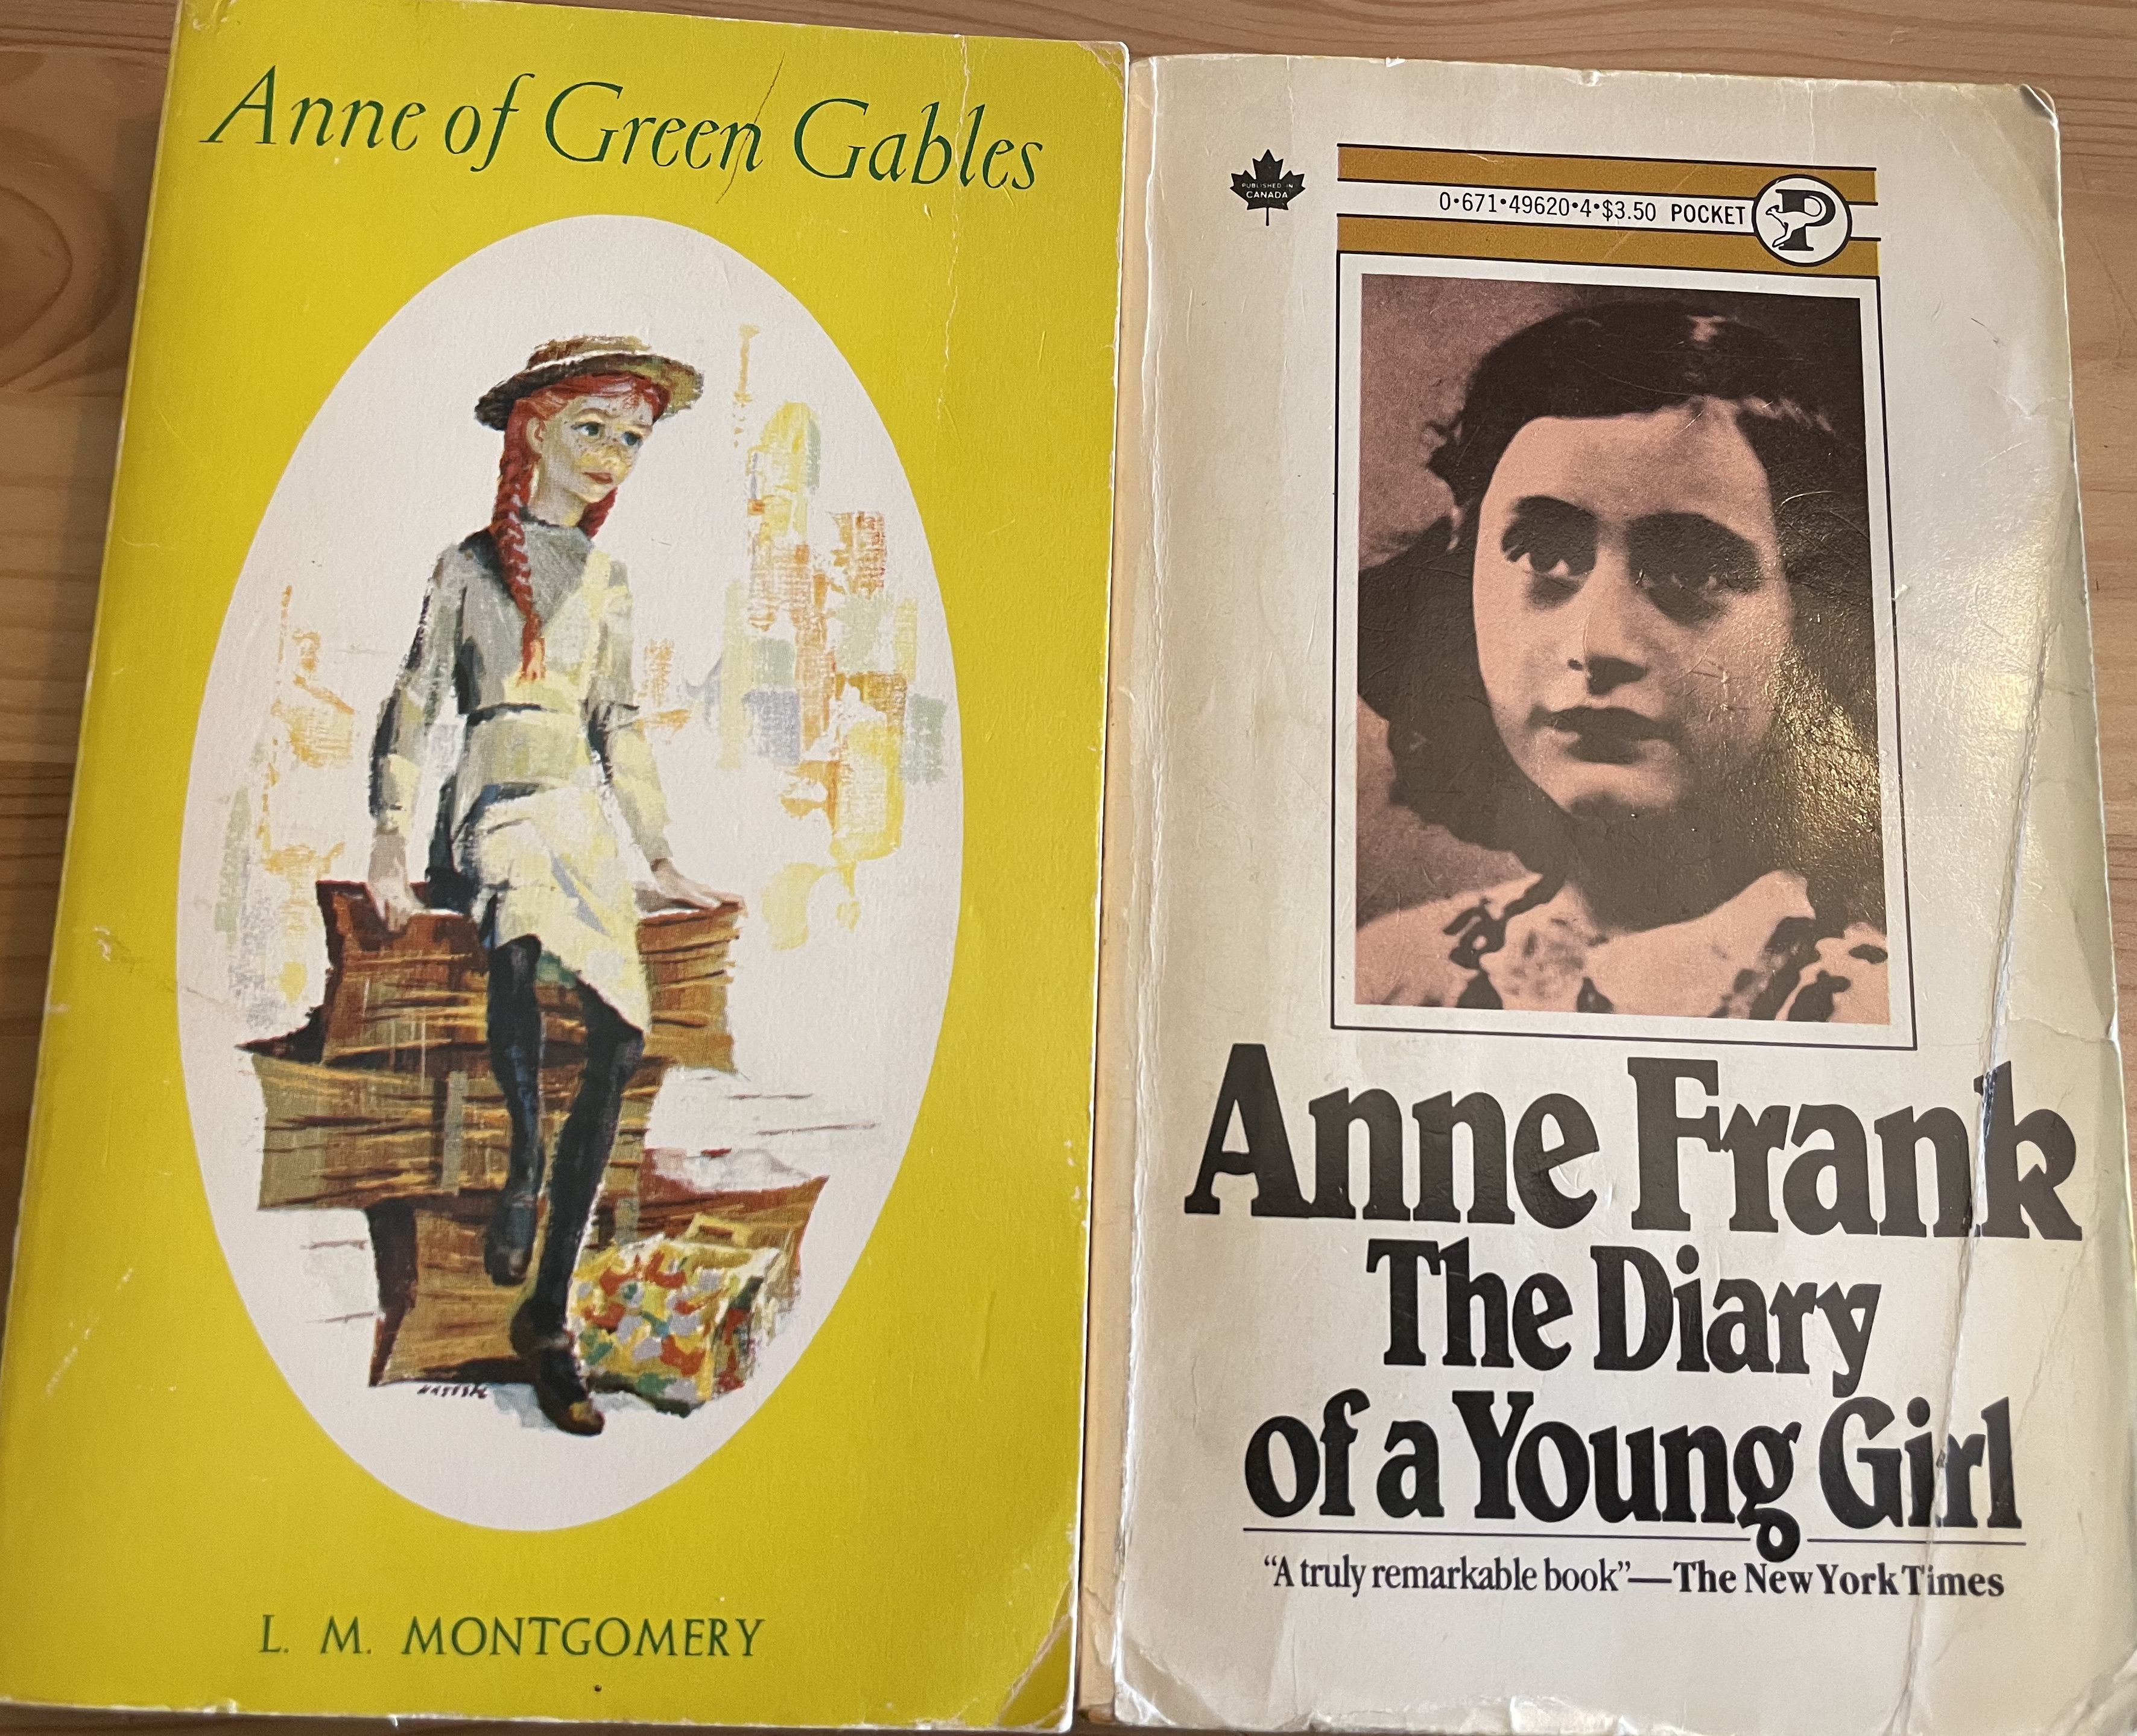 Book covers of Anne of Green Gables on the left and Anne Frank: The Diary of a Young Girl on the right.  